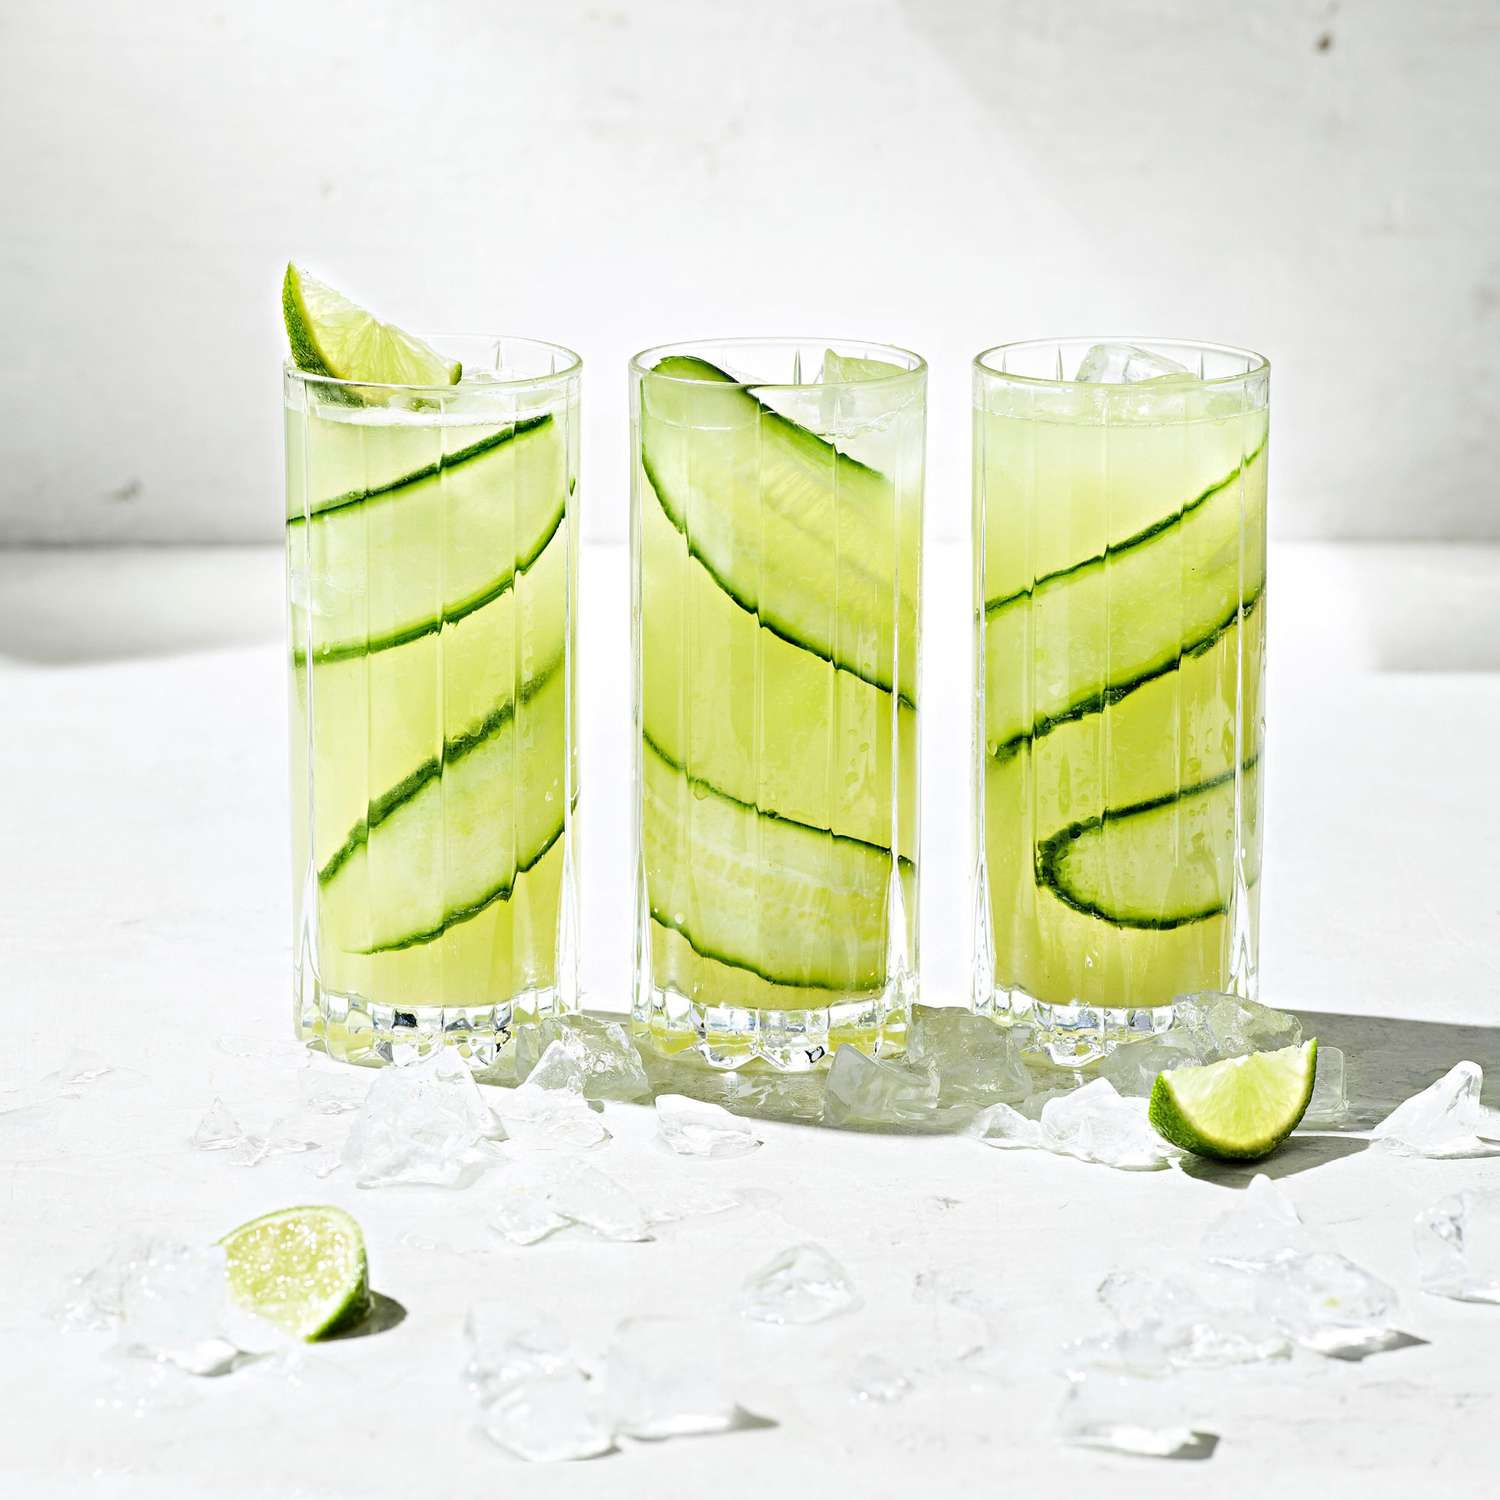 Three lime beverages with cucumber slices